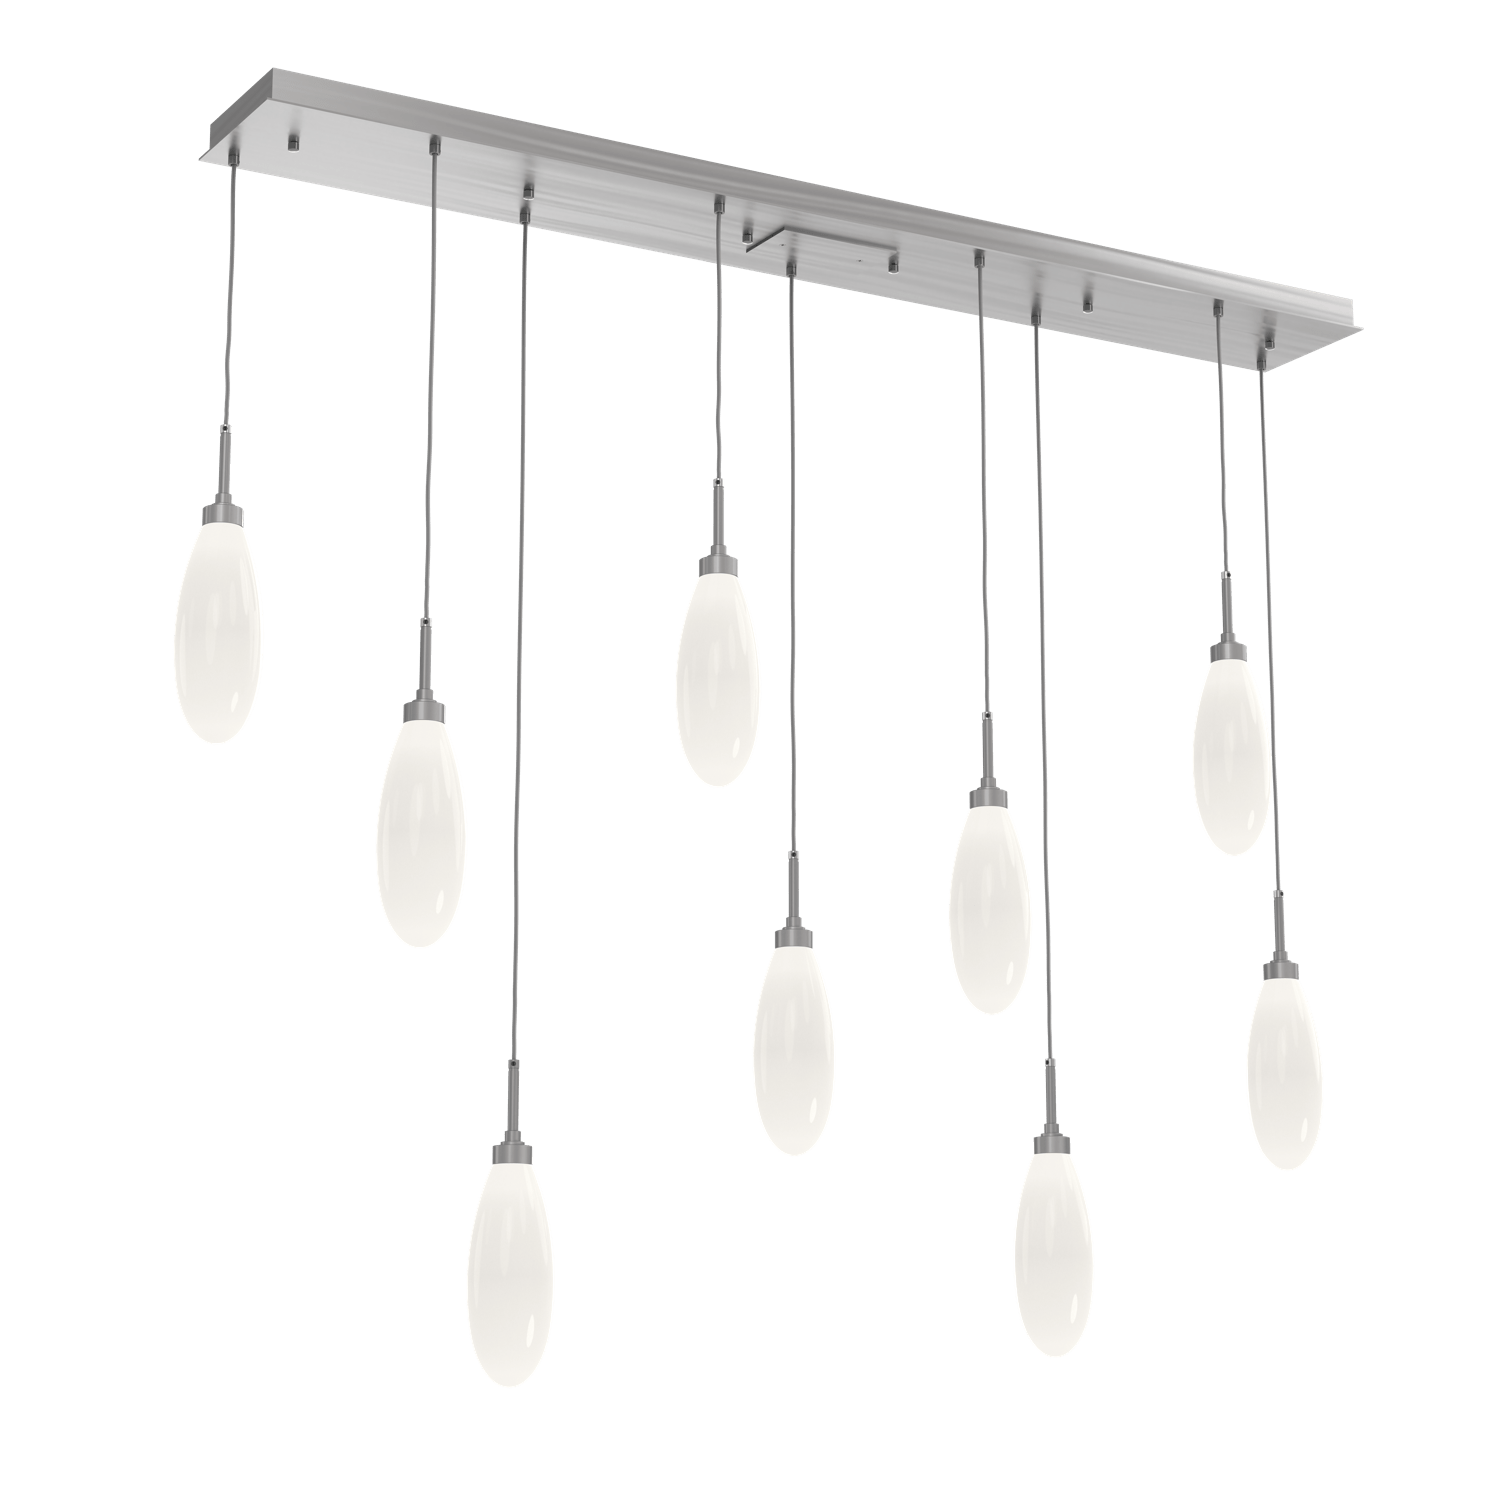 PLB0071-09-SN-WL-LL-Hammerton-Studio-Fiori-9-light-linear-pendant-chandelier-with-satin-nickel-finish-and-opal-white-glass-shades-and-LED-lamping